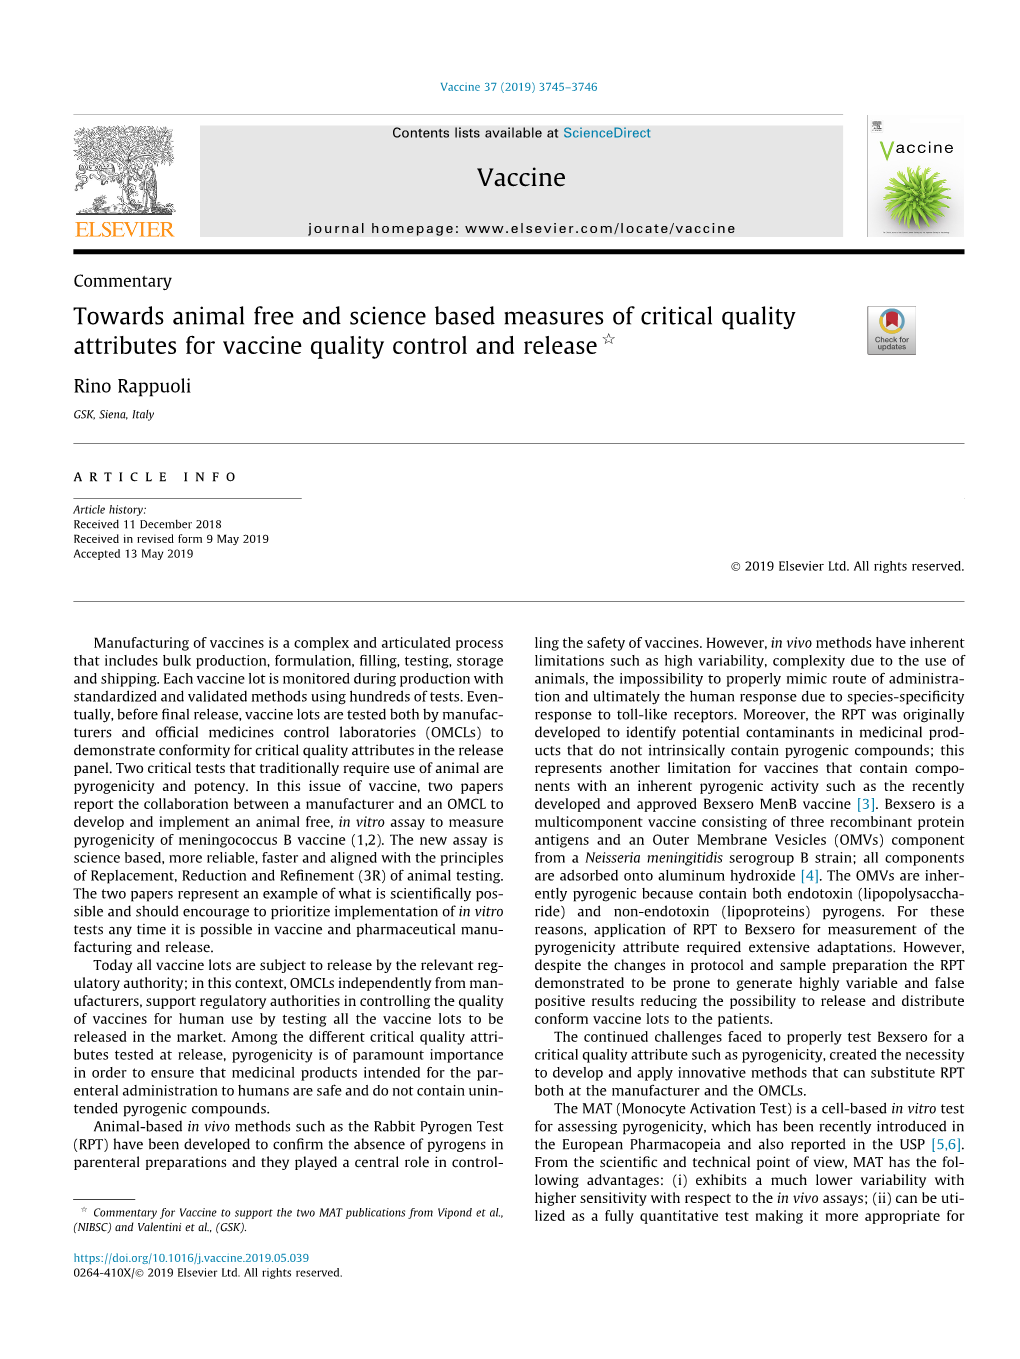 Towards Animal Free and Science Based Measures of Critical Quality Attributes for Vaccine Quality Control and Release Q